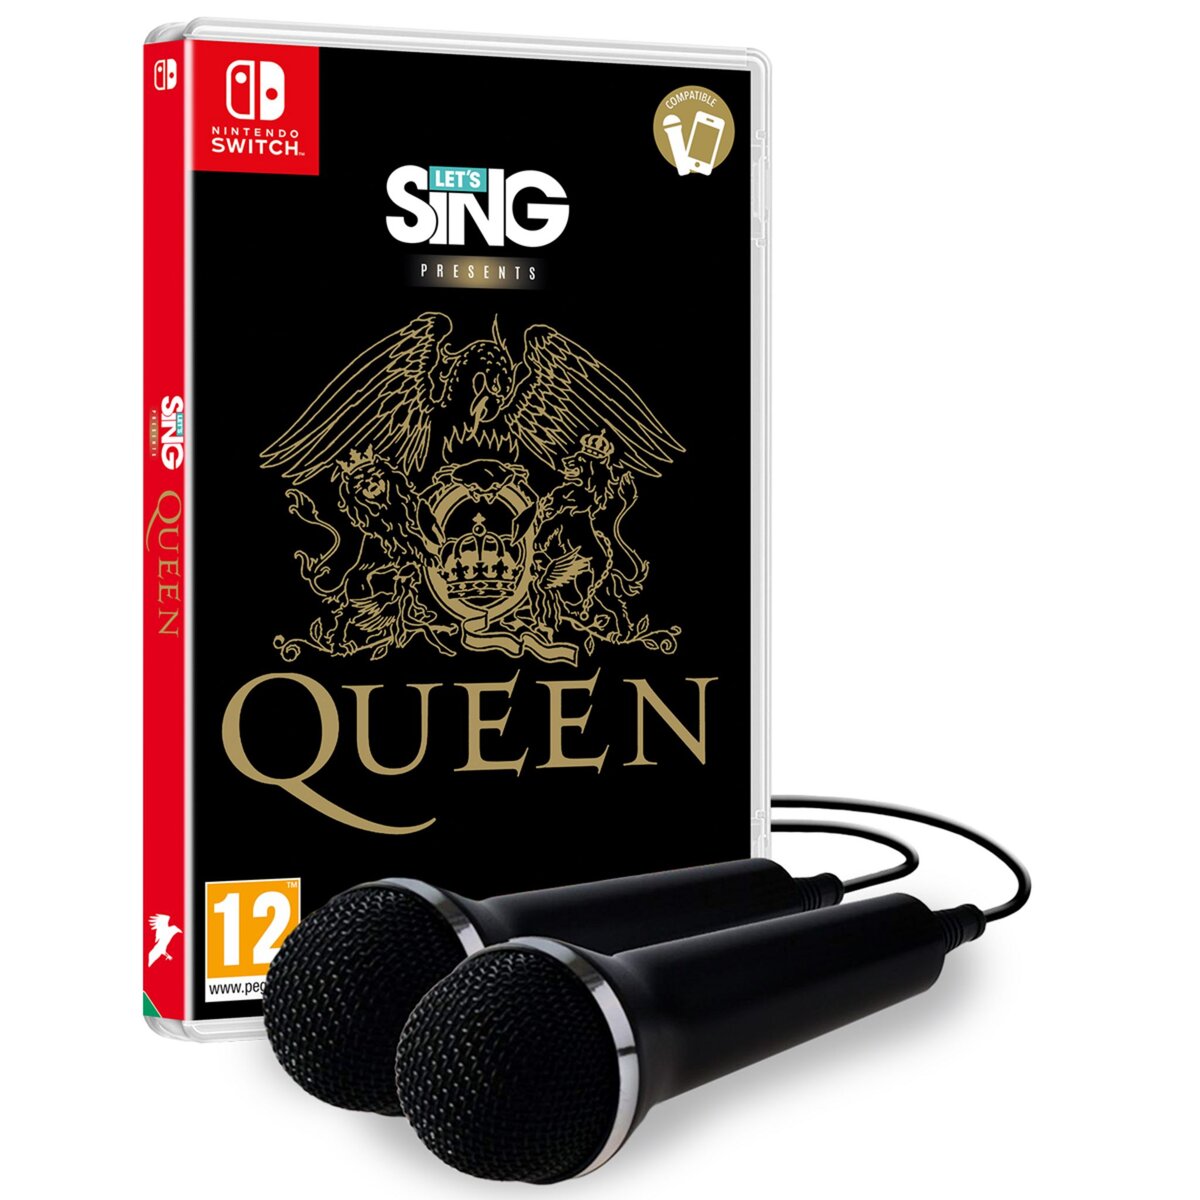 Let's Sing Queen 2 Micros Nintendo Switch